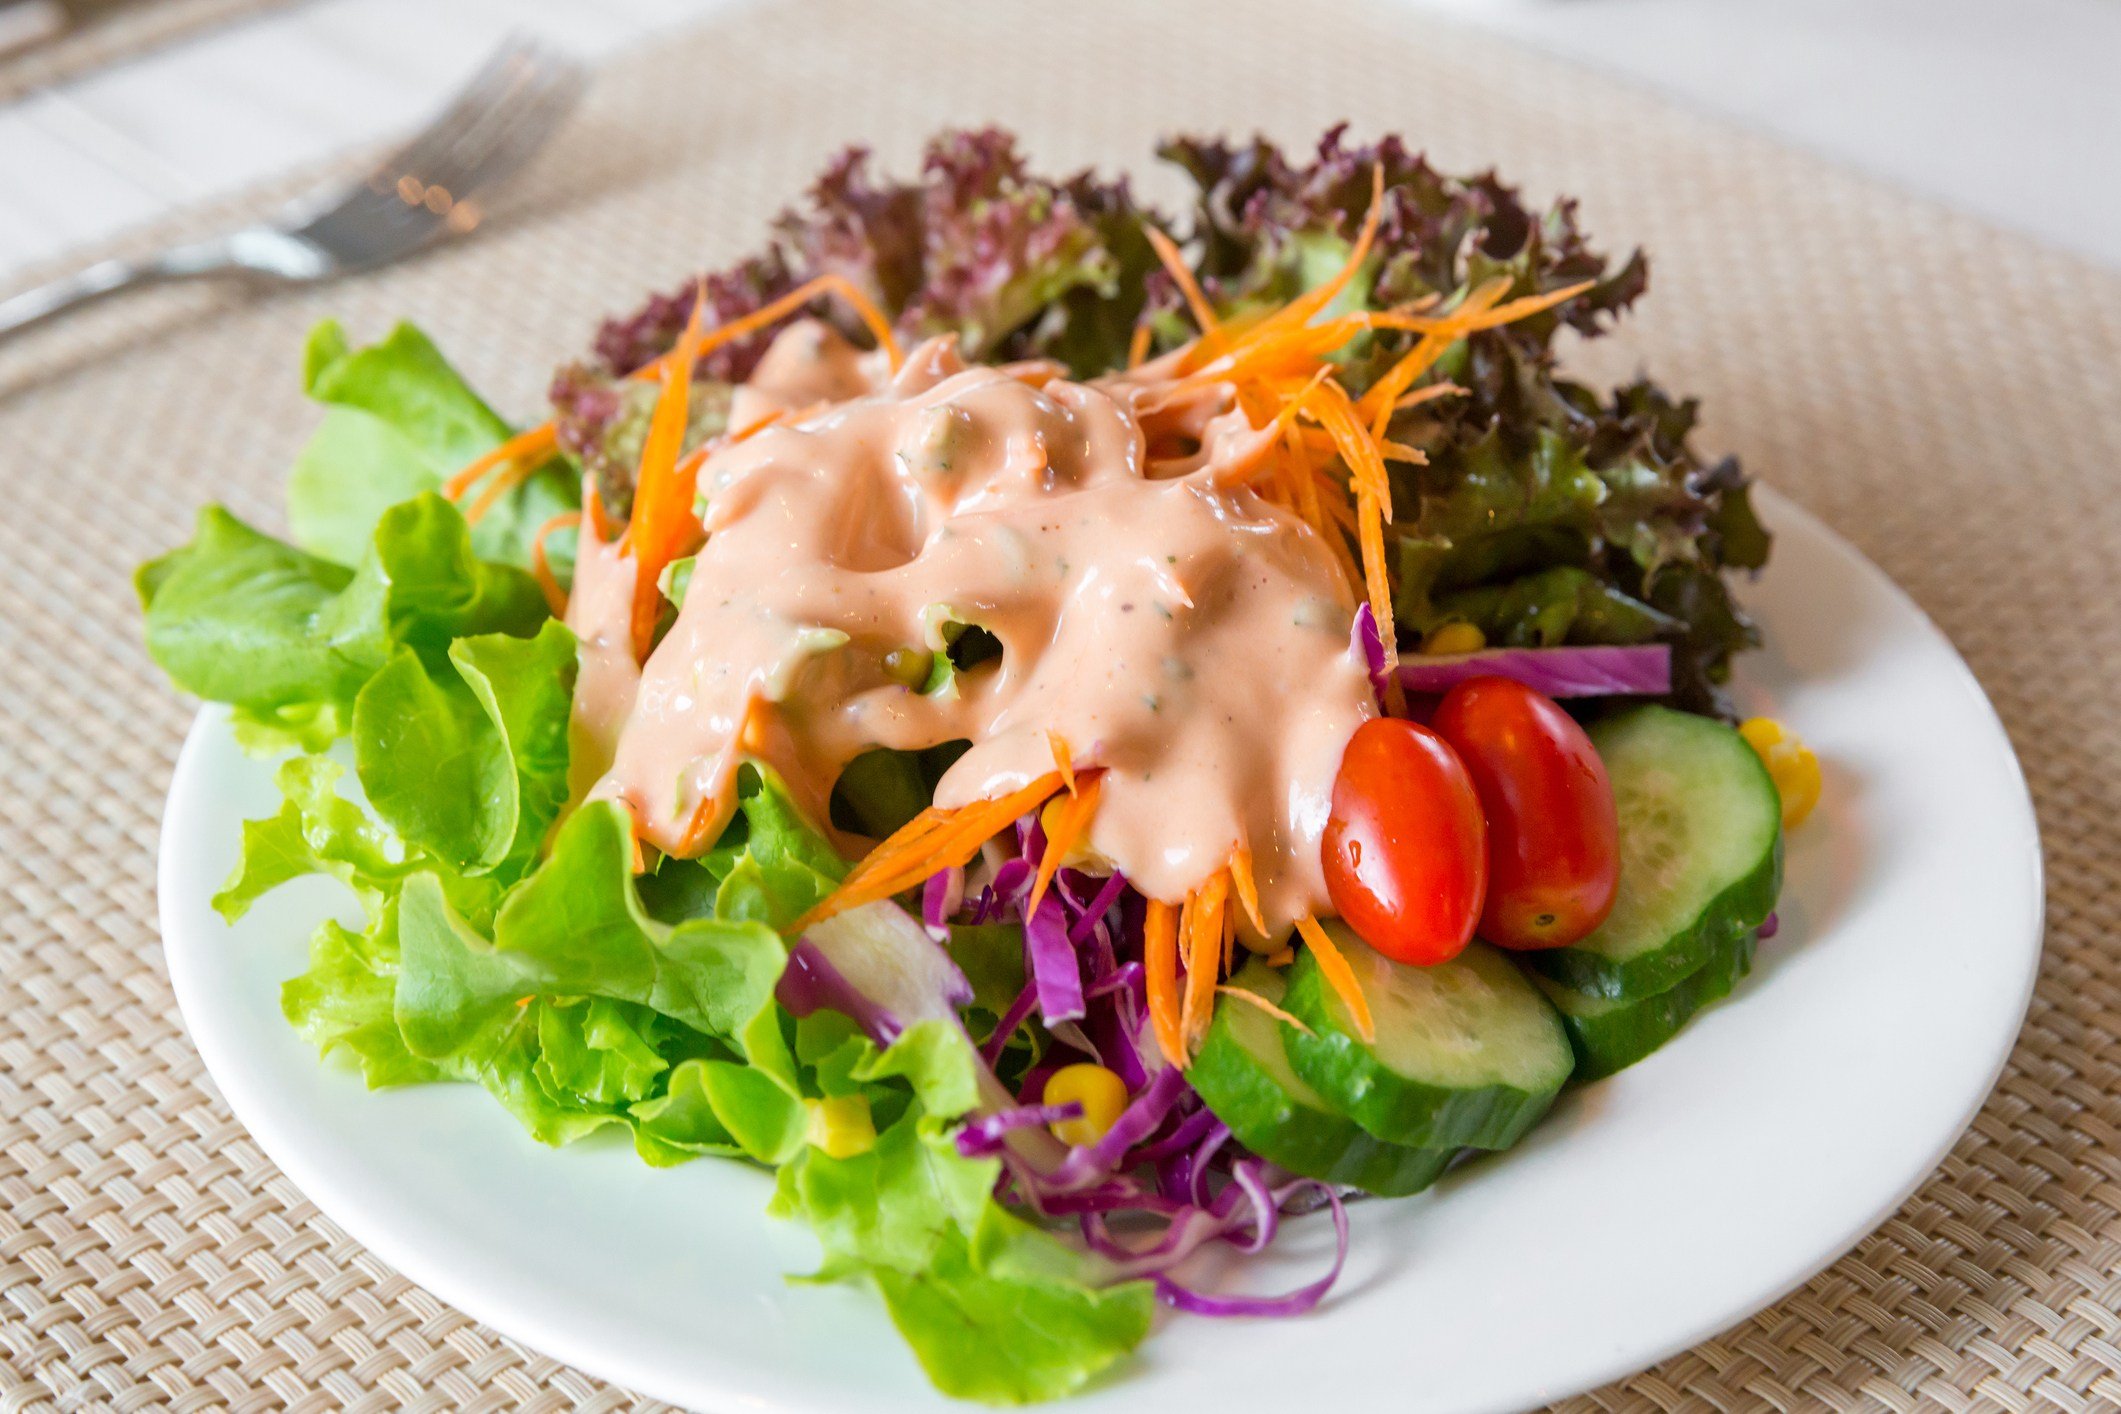 Salad with russian or thousand island dressing